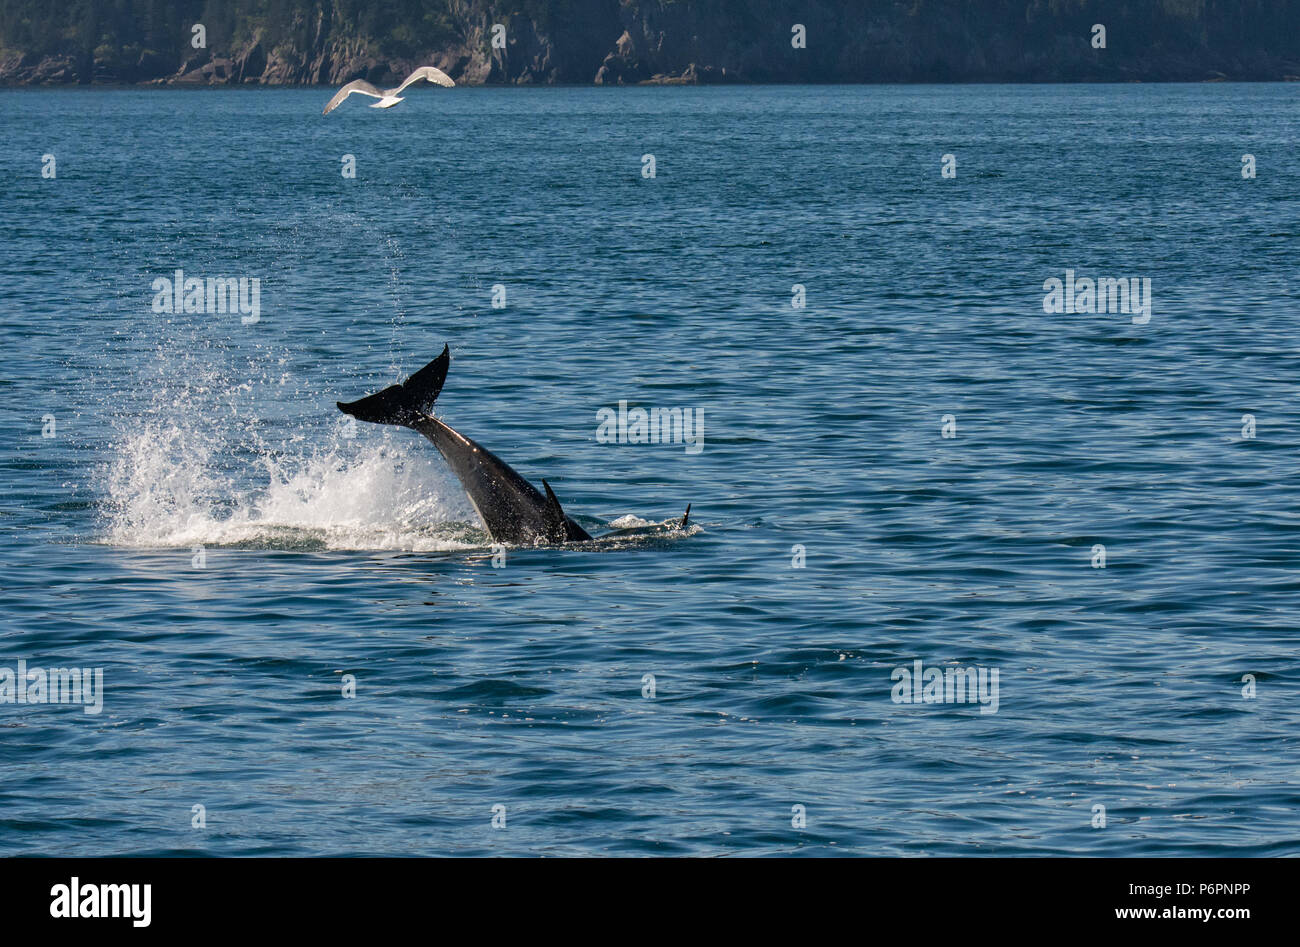 A small orca violently swings its tail sending spray everywere as it slides into a dive from the surface. Stock Photo